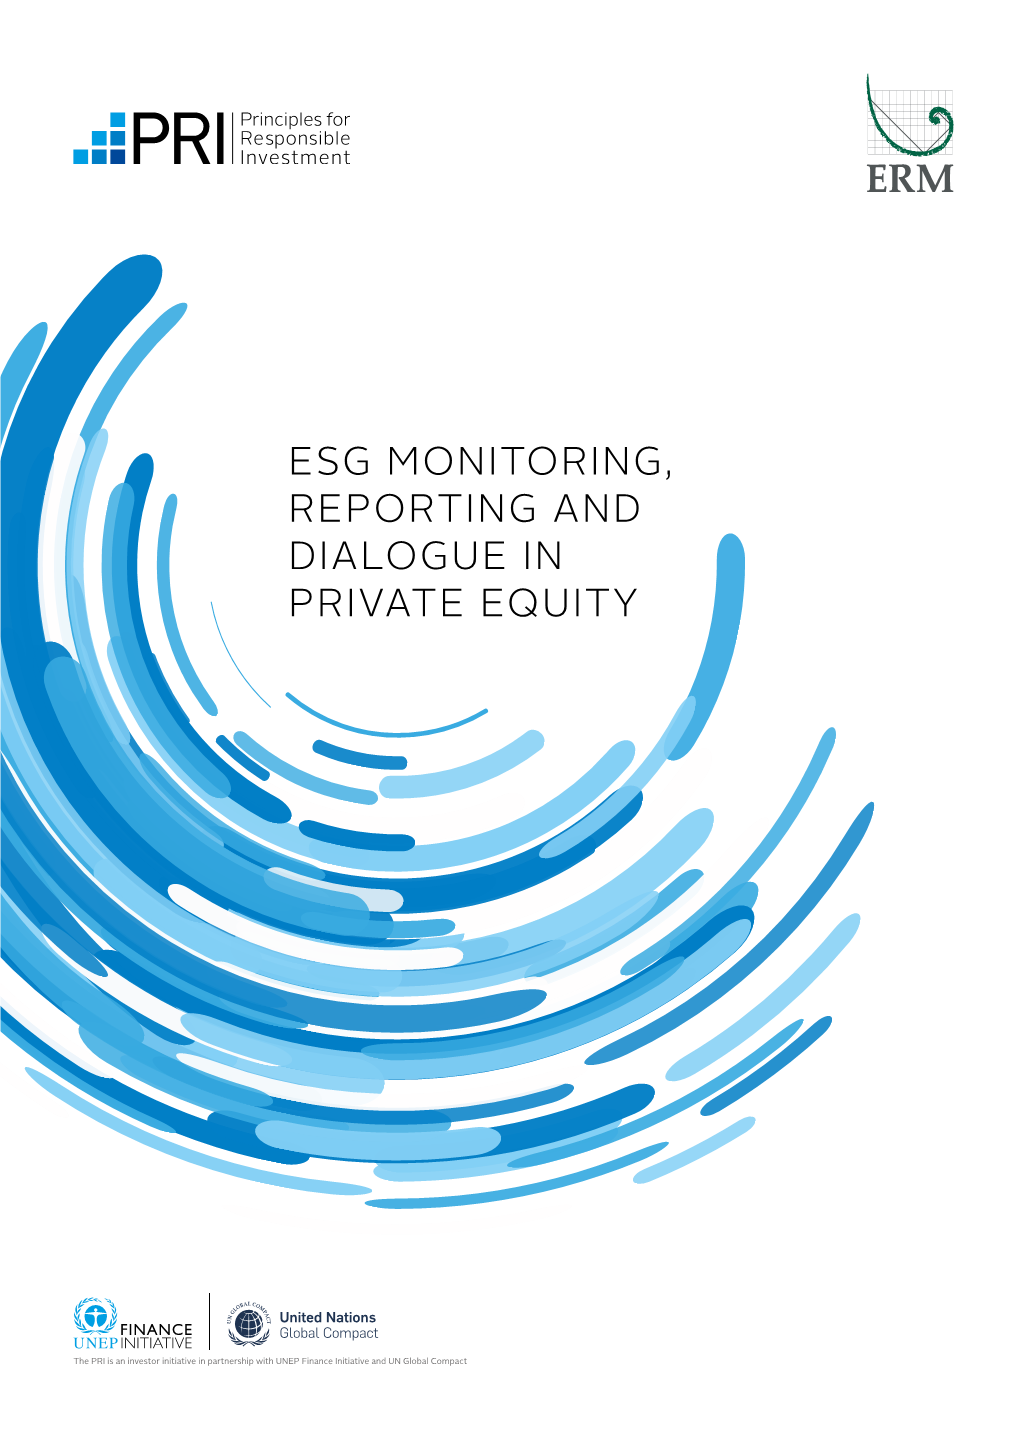 Esg Monitoring, Reporting and Dialogue in Private Equity